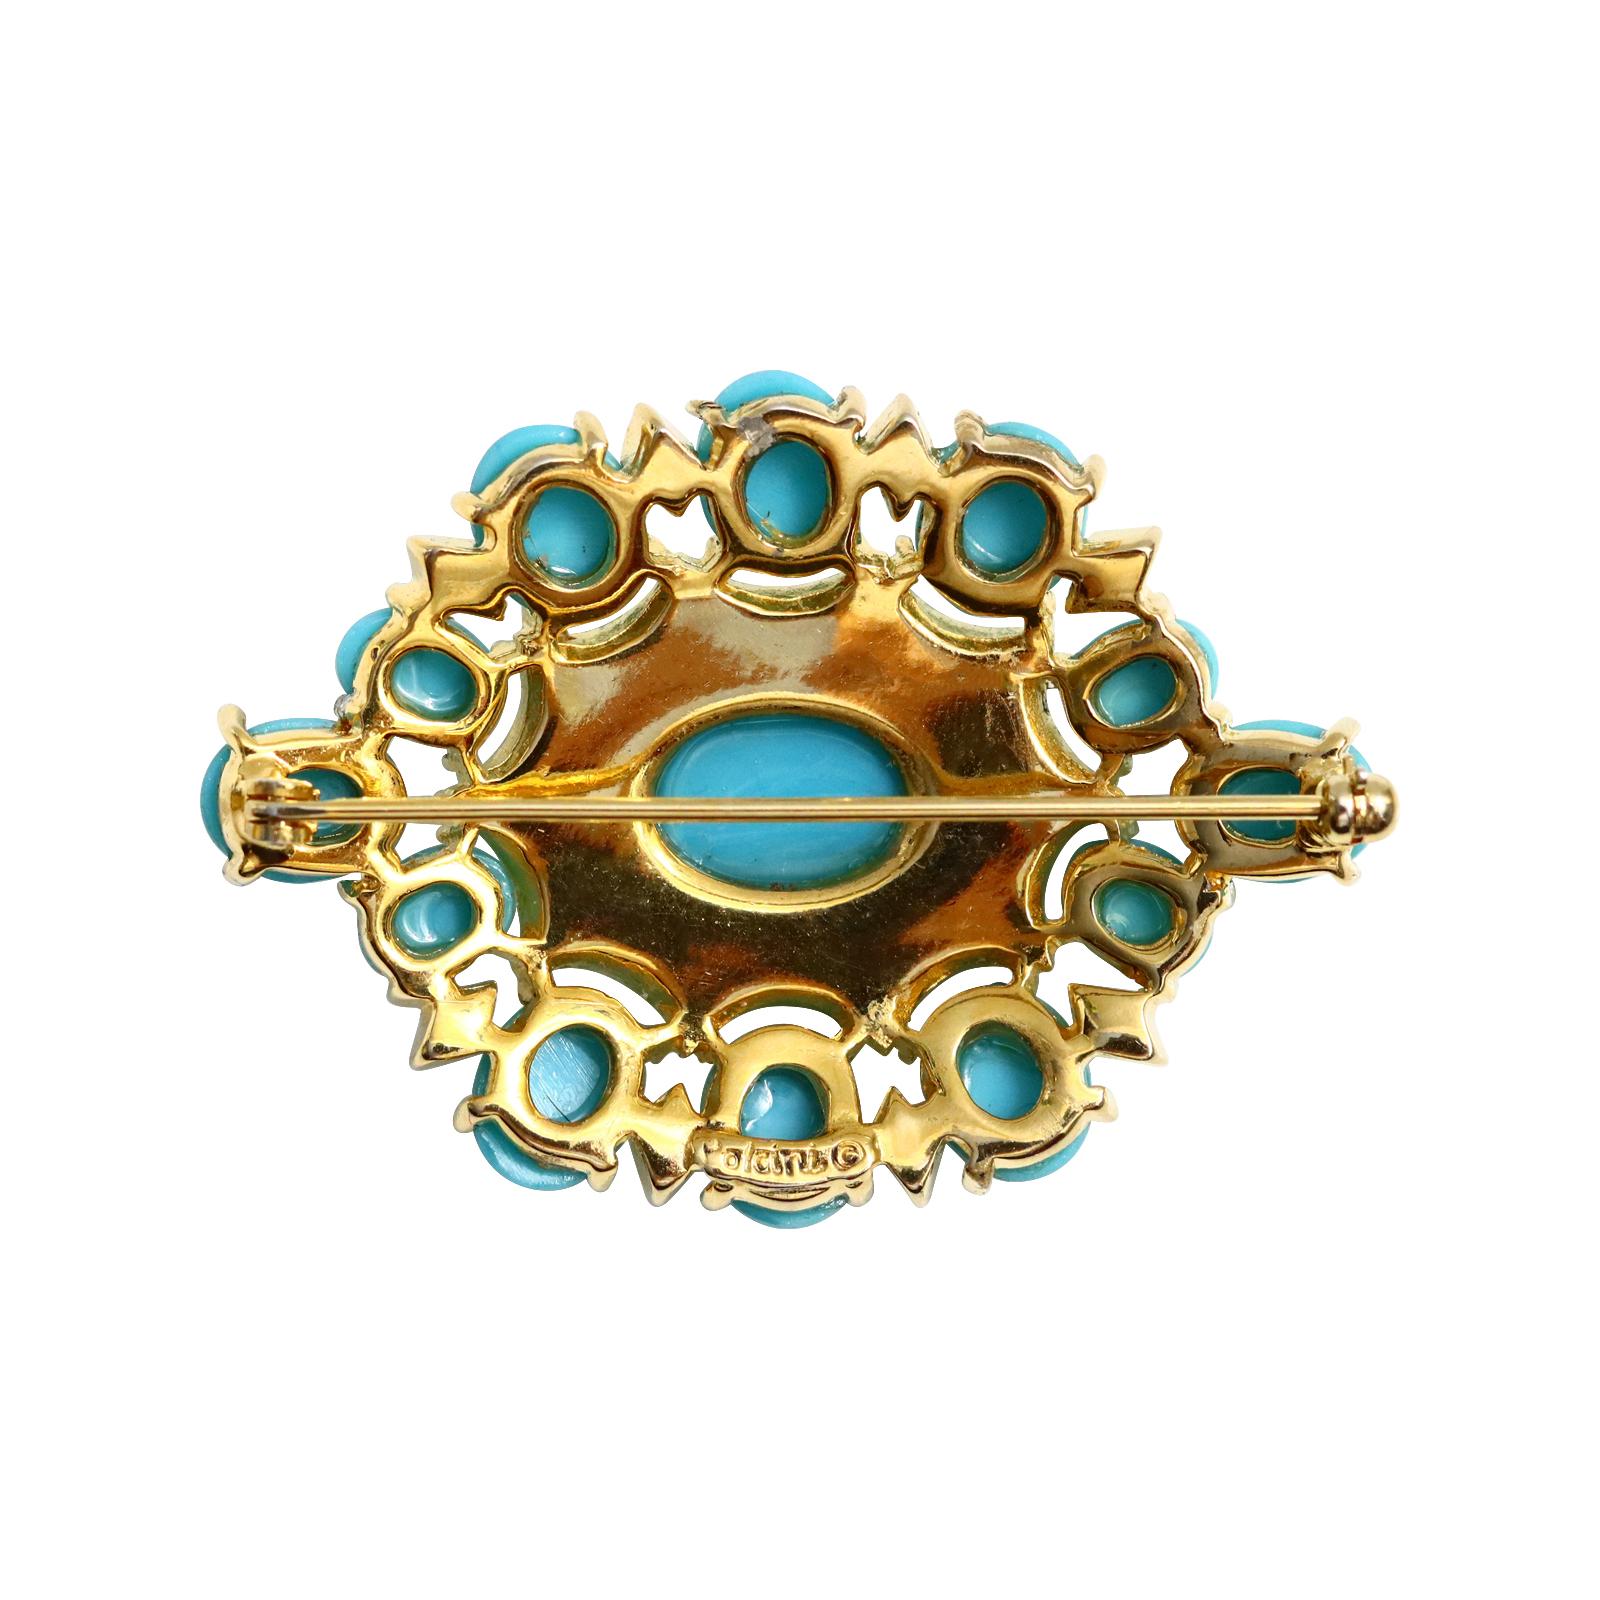 Vintage Polcini Diamante with Faux Turquoise Brooch Circa 1980s For Sale 1